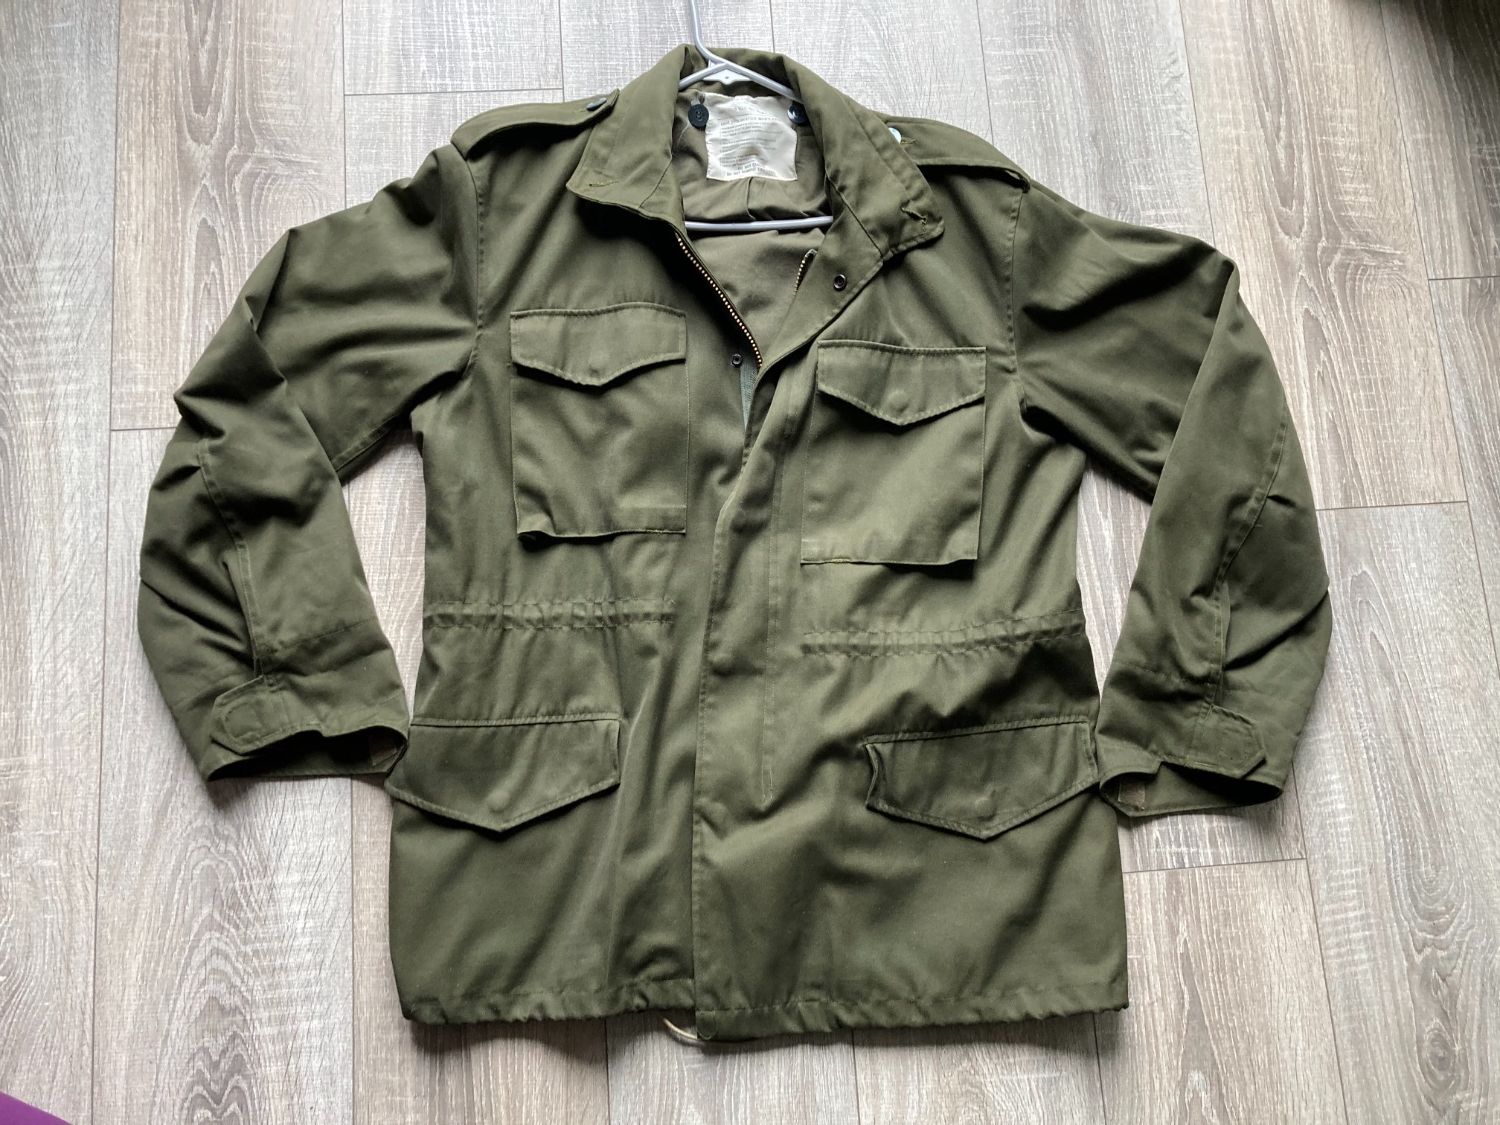 Combat Jacket for sale - Gear - Airsoft Forums UK